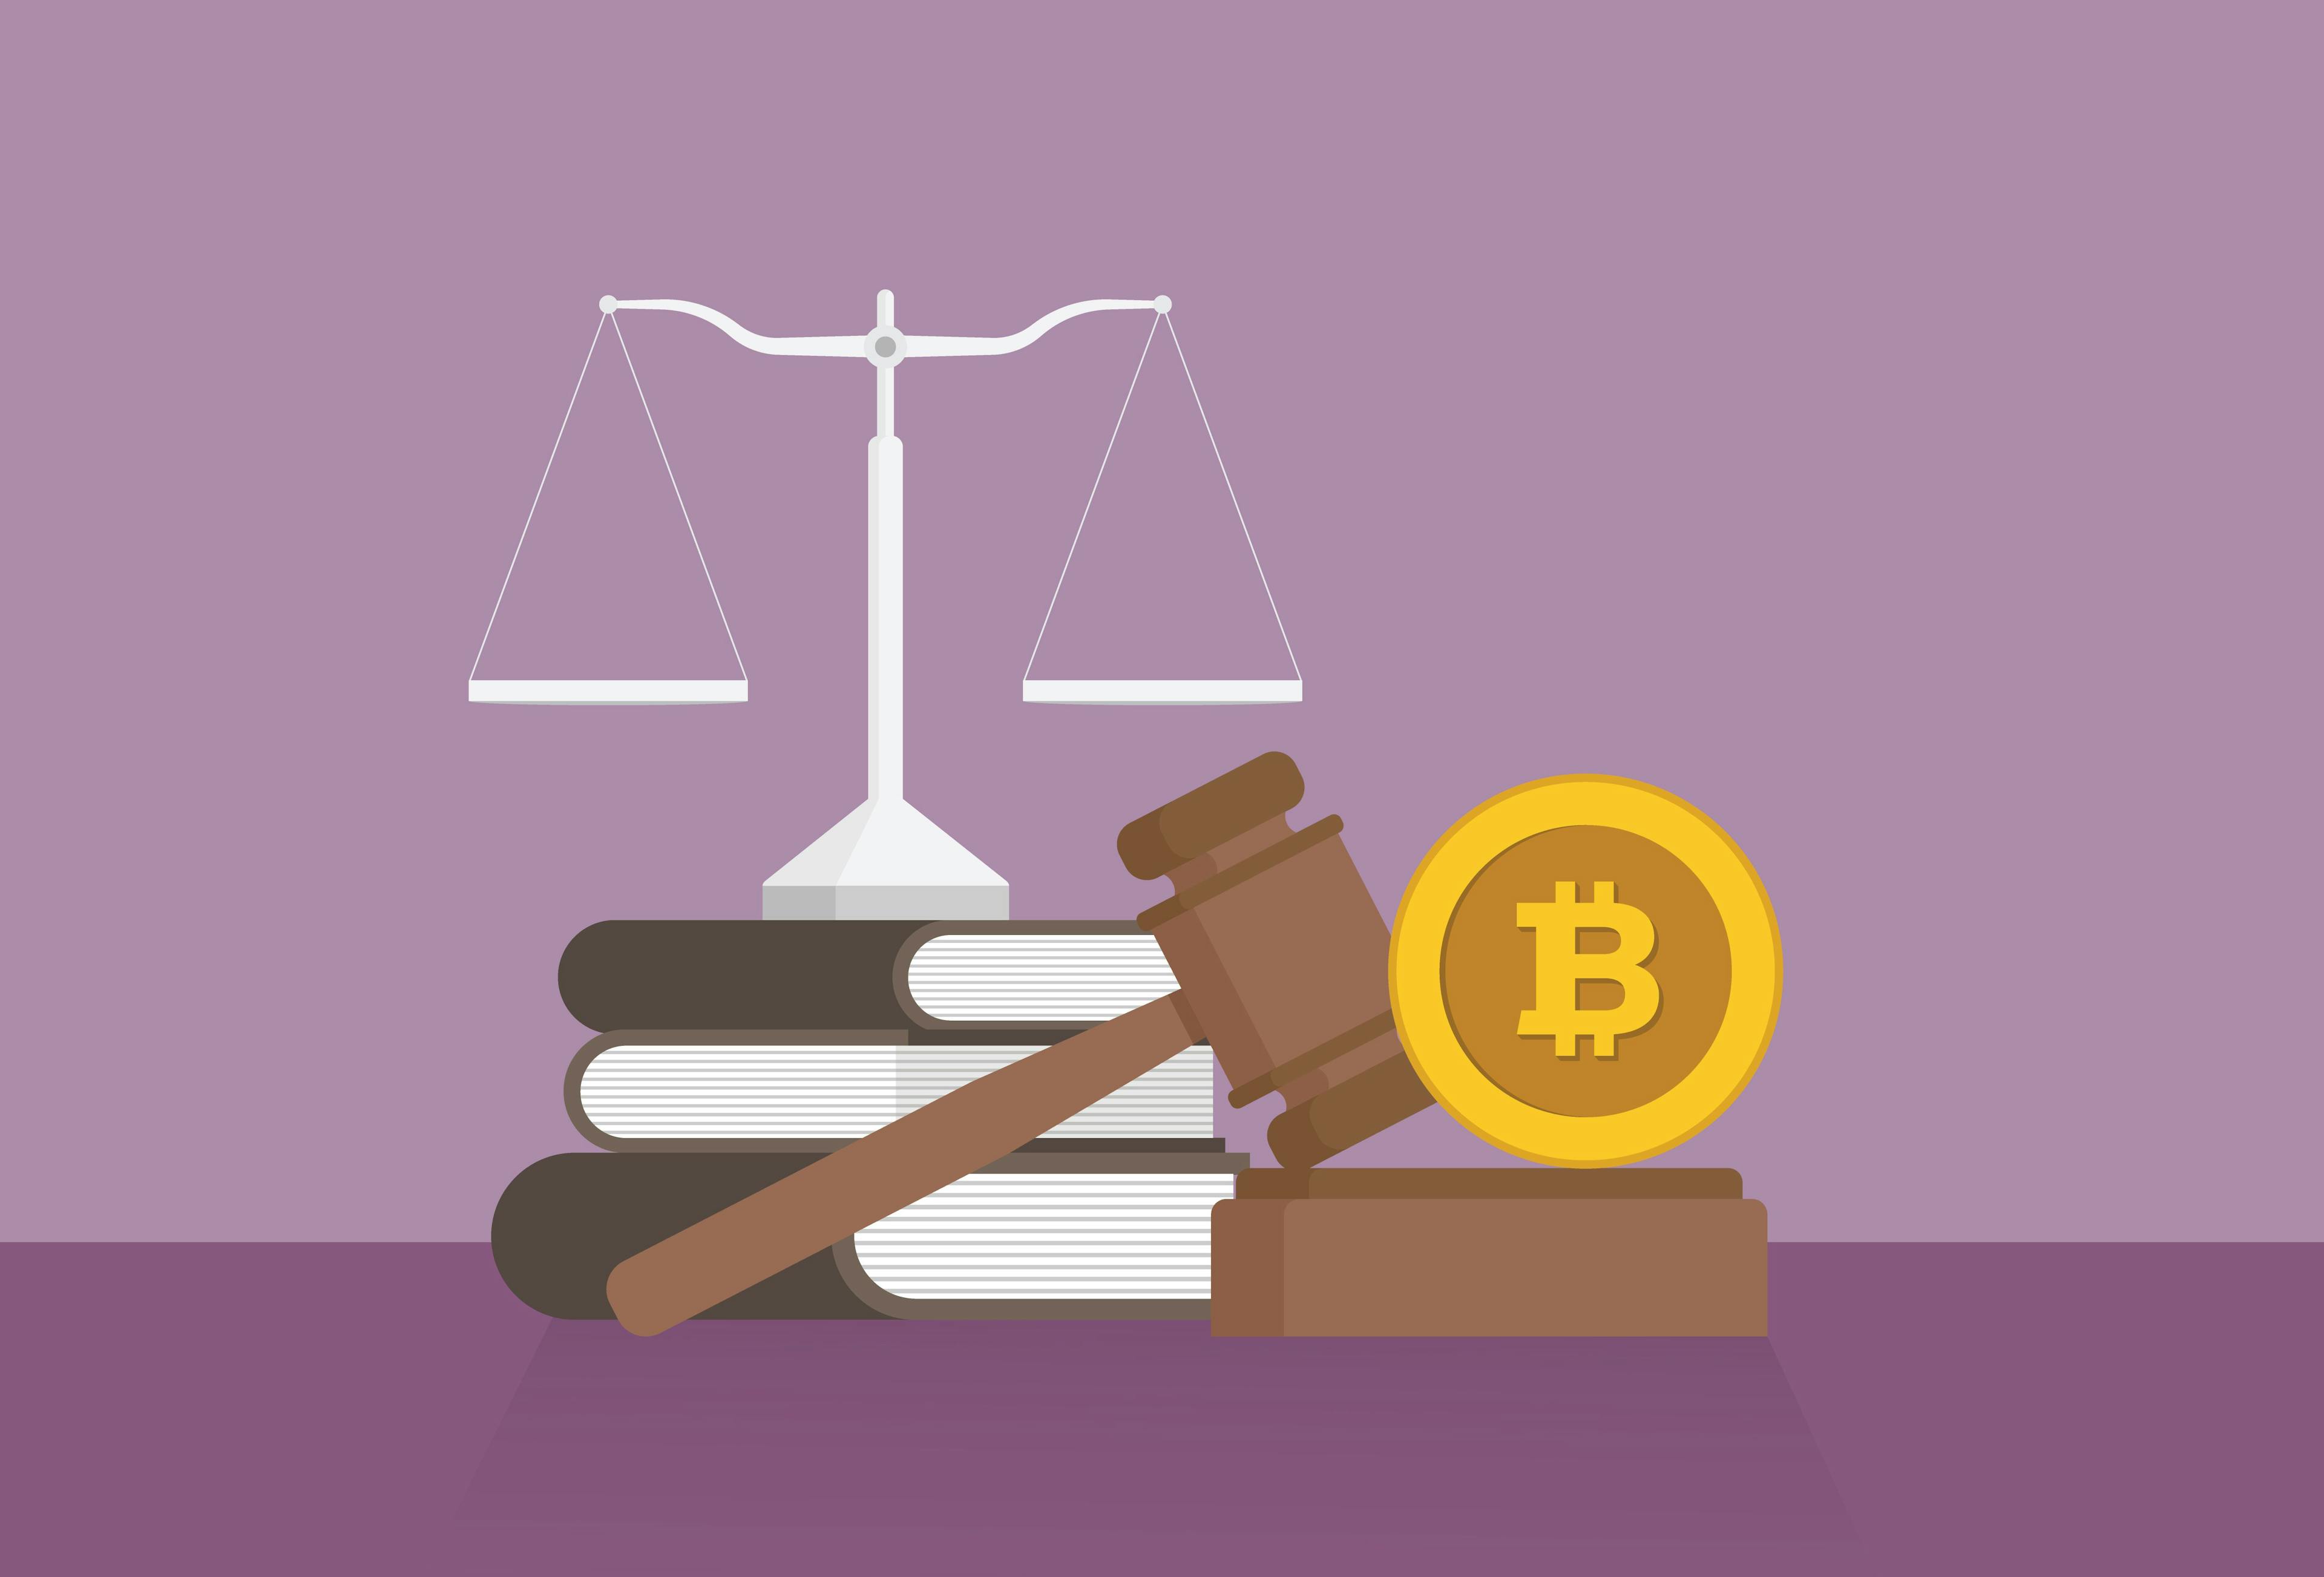 An illustration with the scales of justice, a gavel and a bitcoin coin